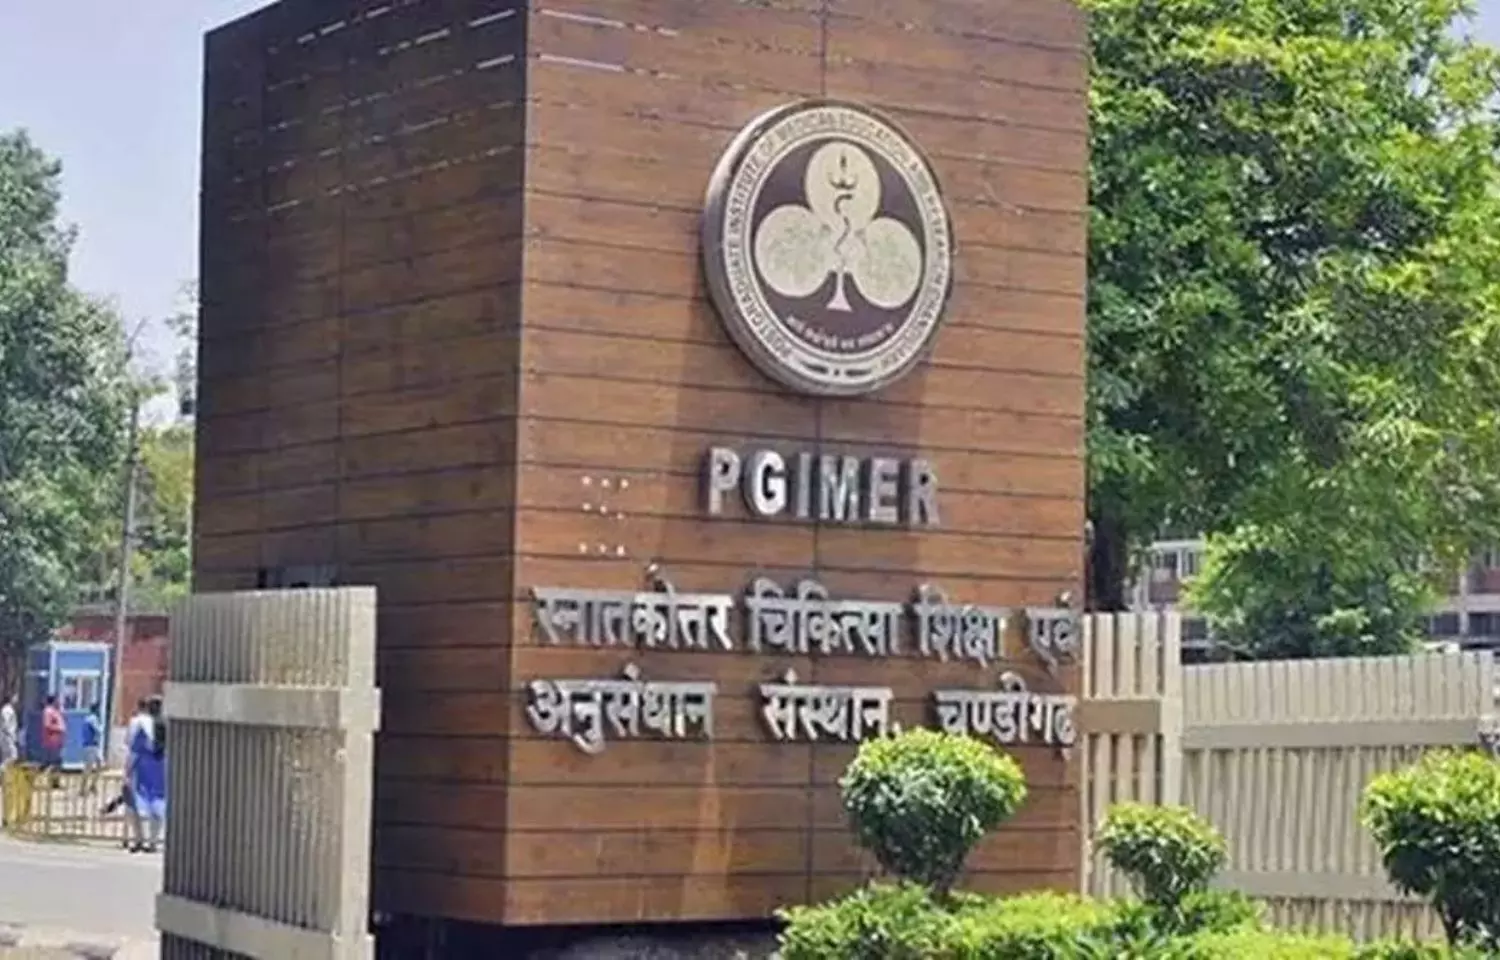 PGIMER to send detailed proposal for MBBS course to Health Ministry